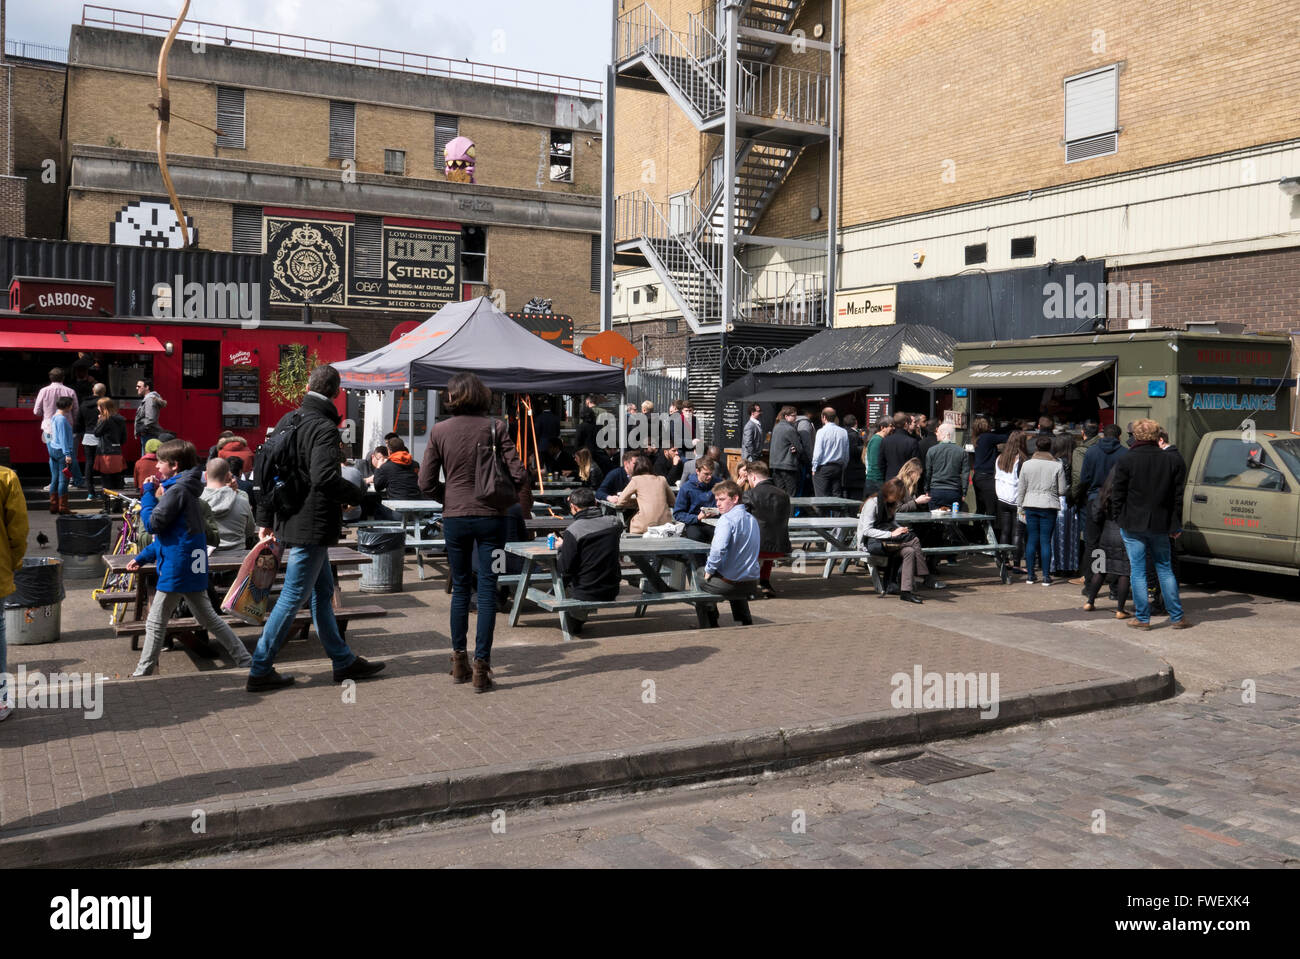 People eating fast food and drinking in an outdoor restaurant in London, United Kingdom. Stock Photo